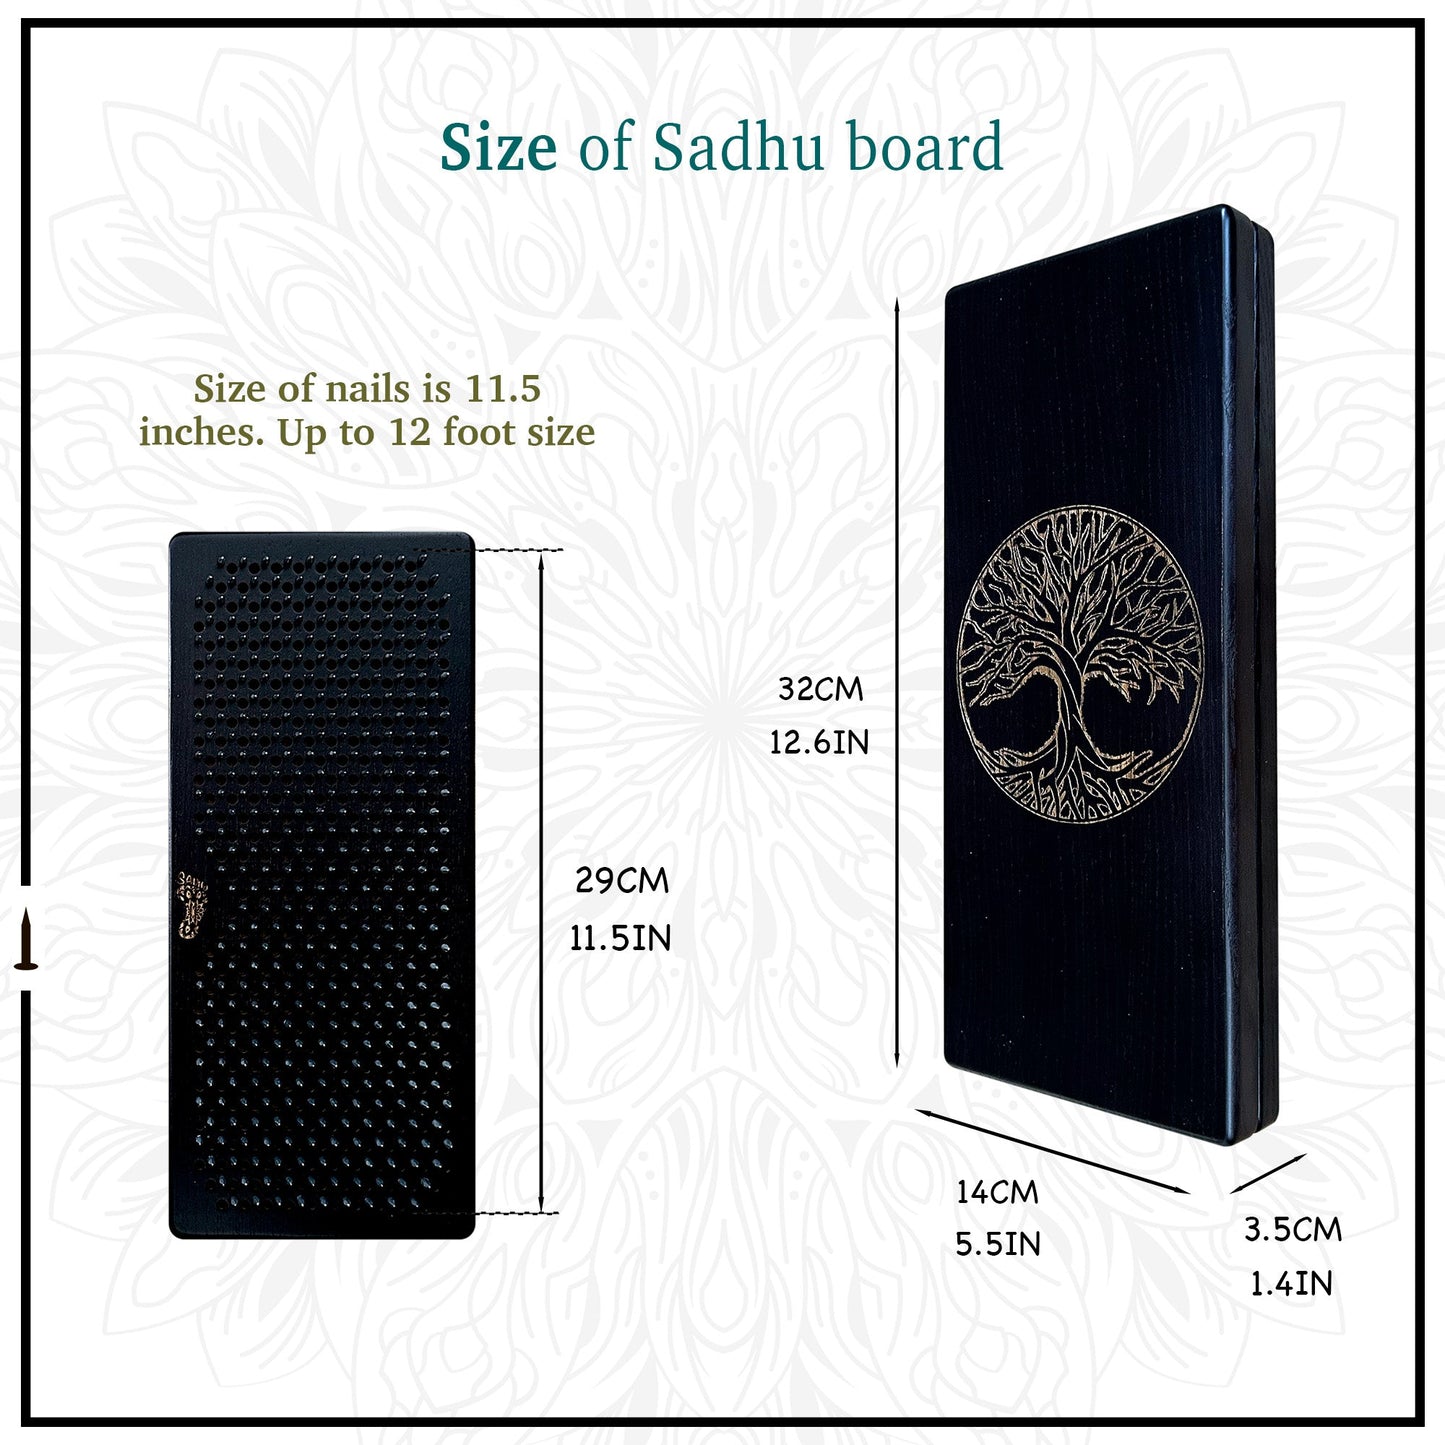 dimensions of sadhu boards "tree of life"